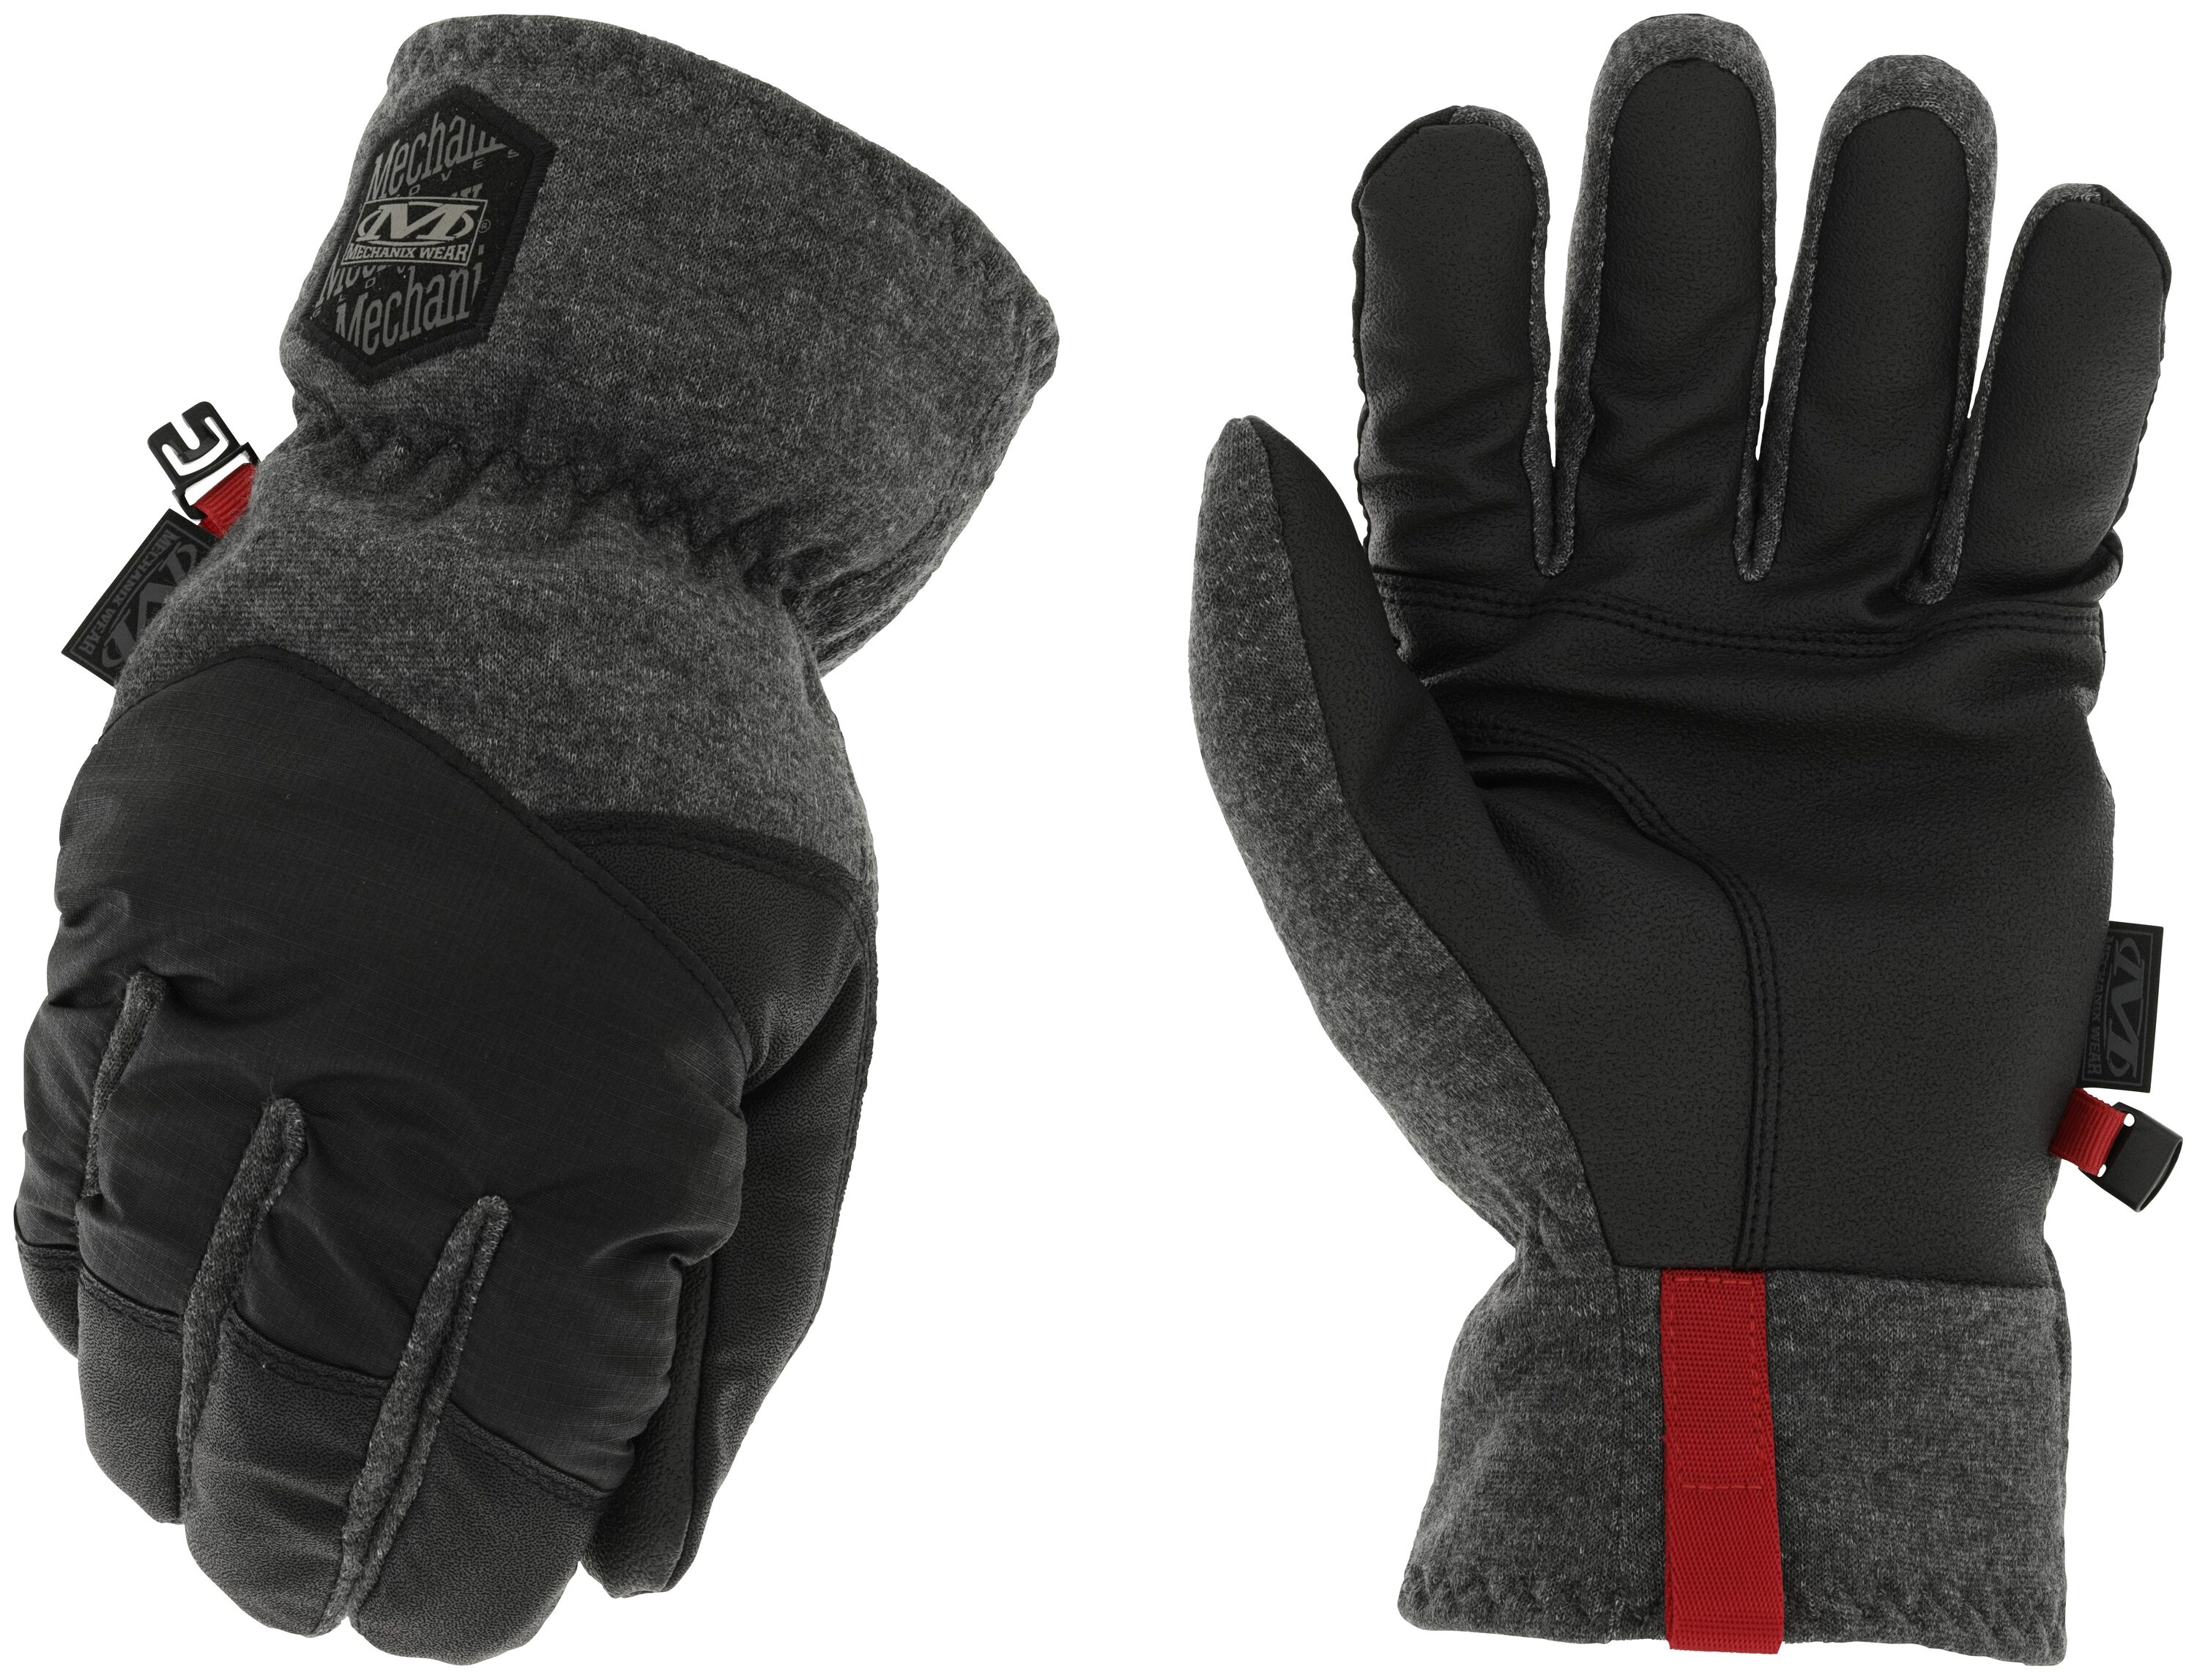 West Chester Men's Performance Fleece Winter Gloves, 1 Pair at Tractor  Supply Co.